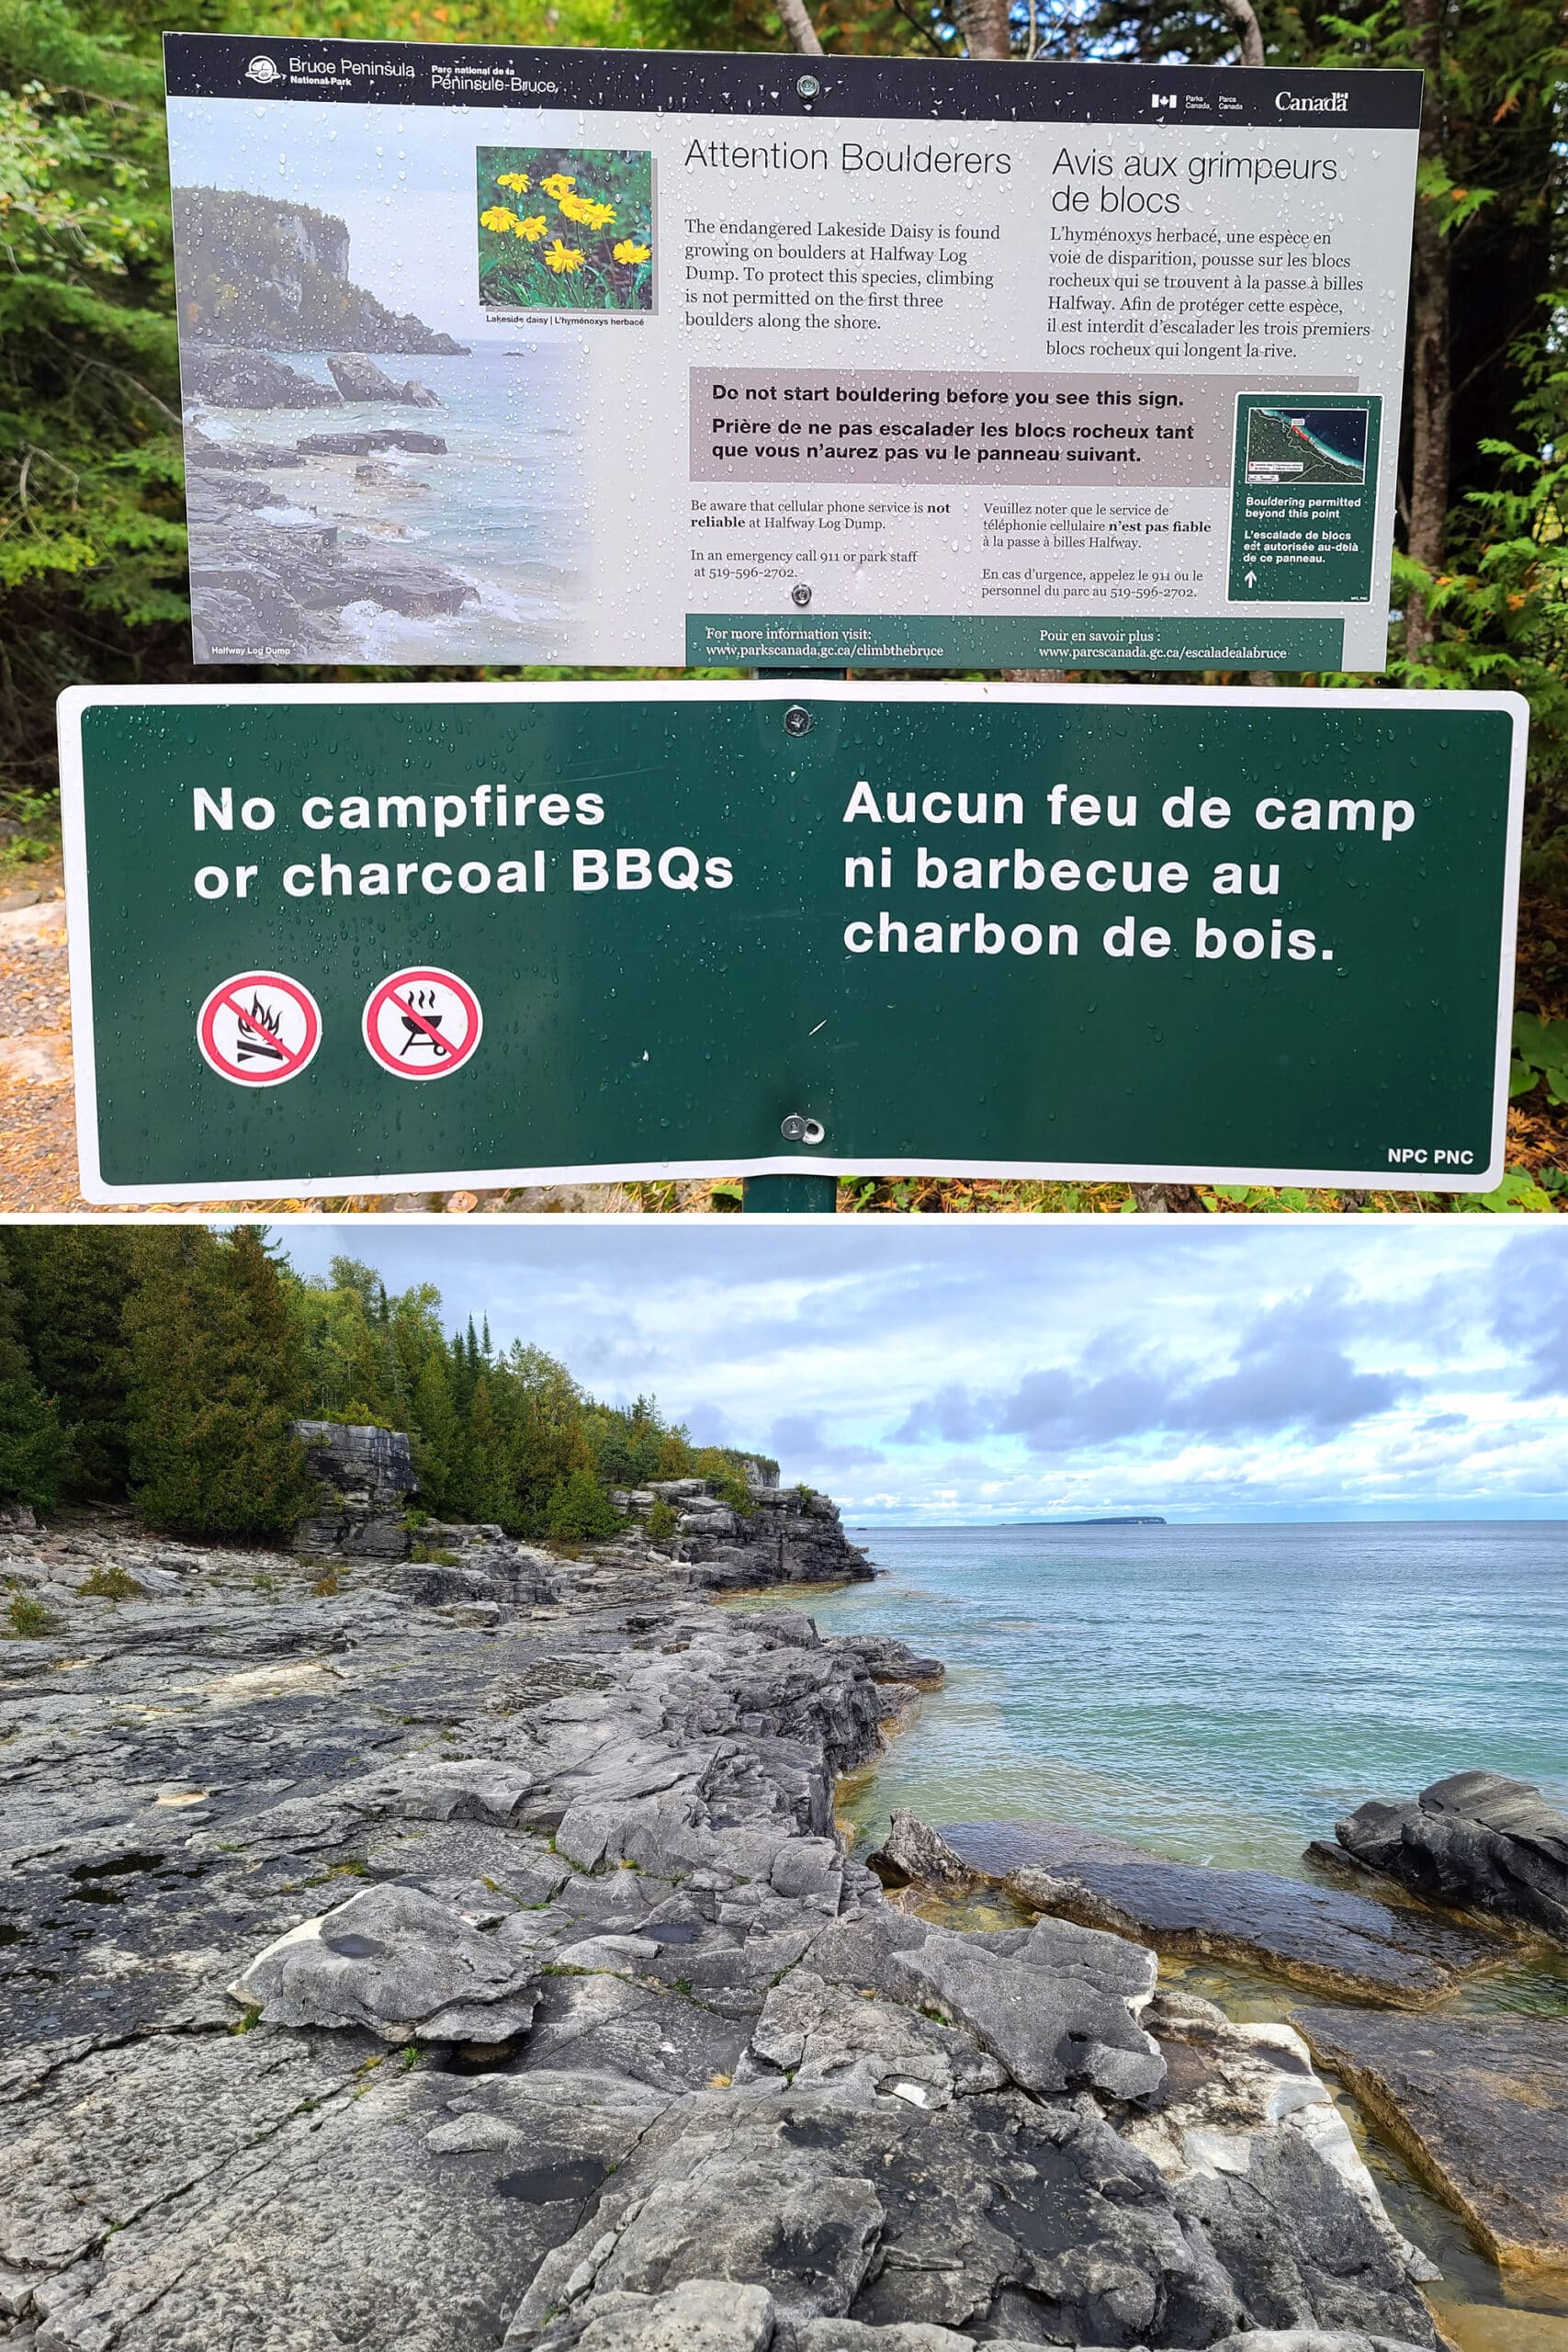 2 part image showing park signage about bouldering, and a view out over halfway log dump.